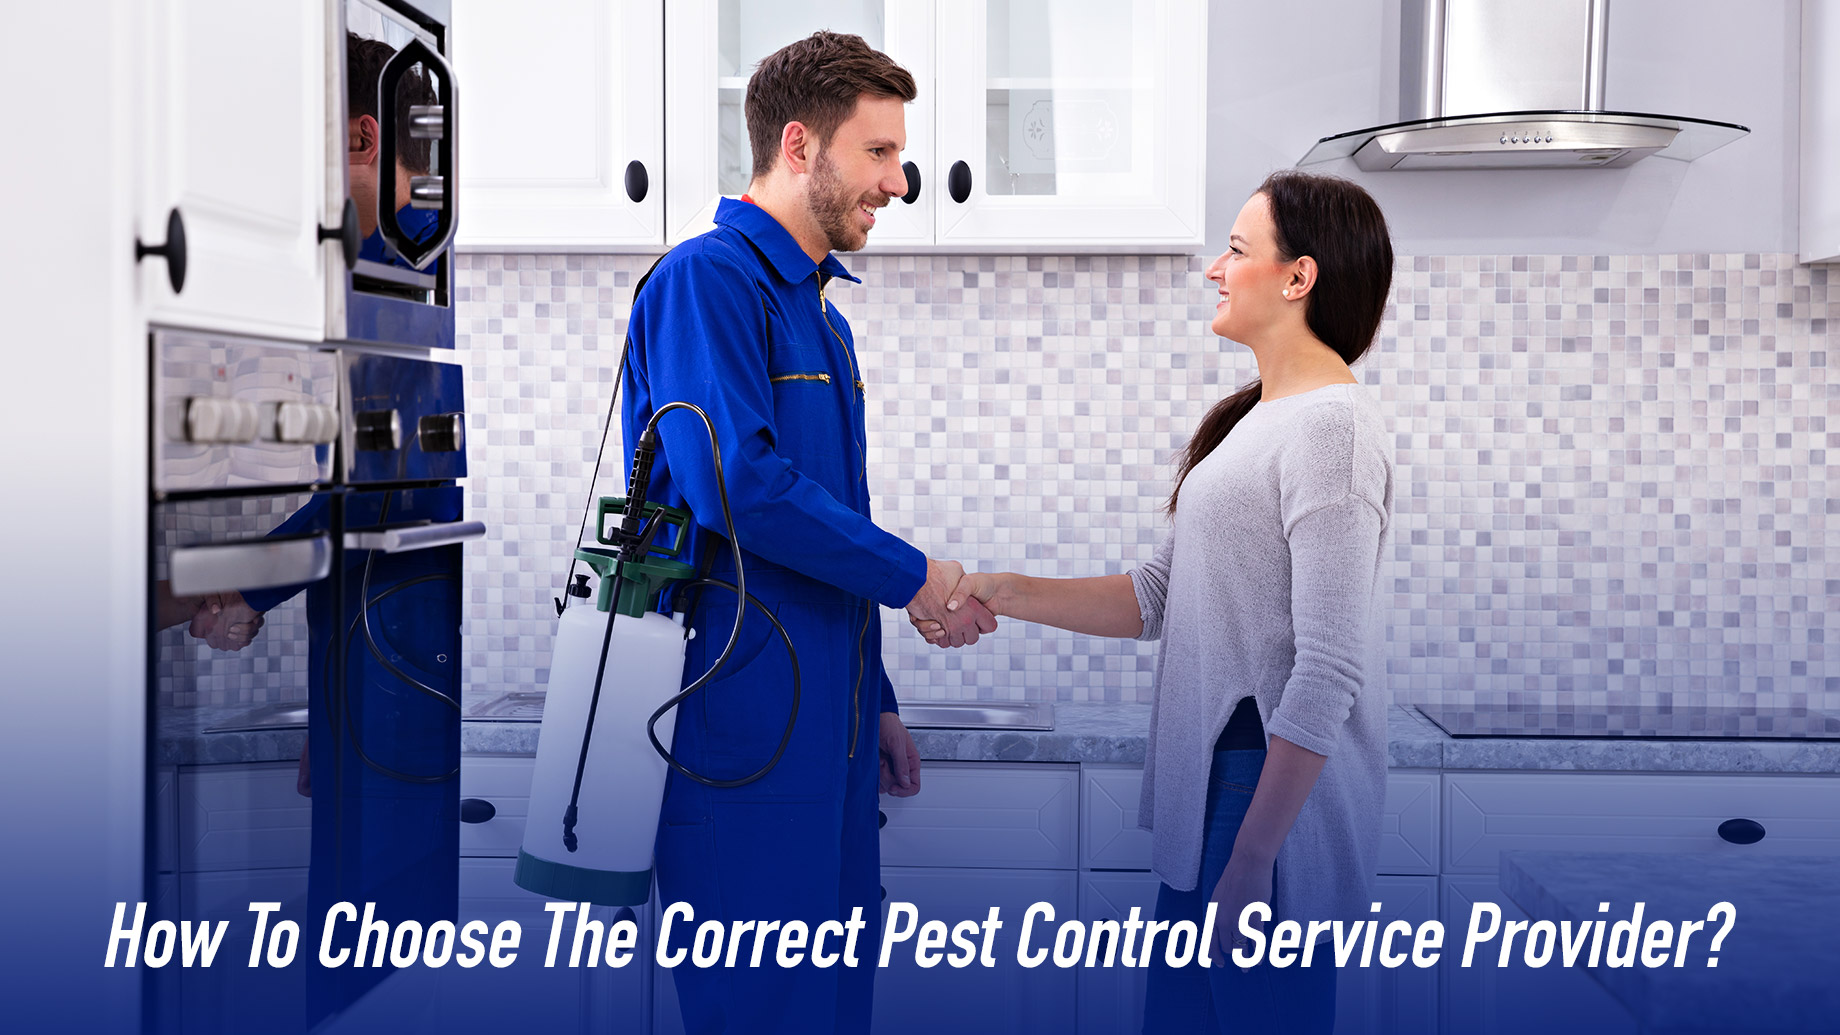 How To Choose The Correct Pest Control Service Provider?